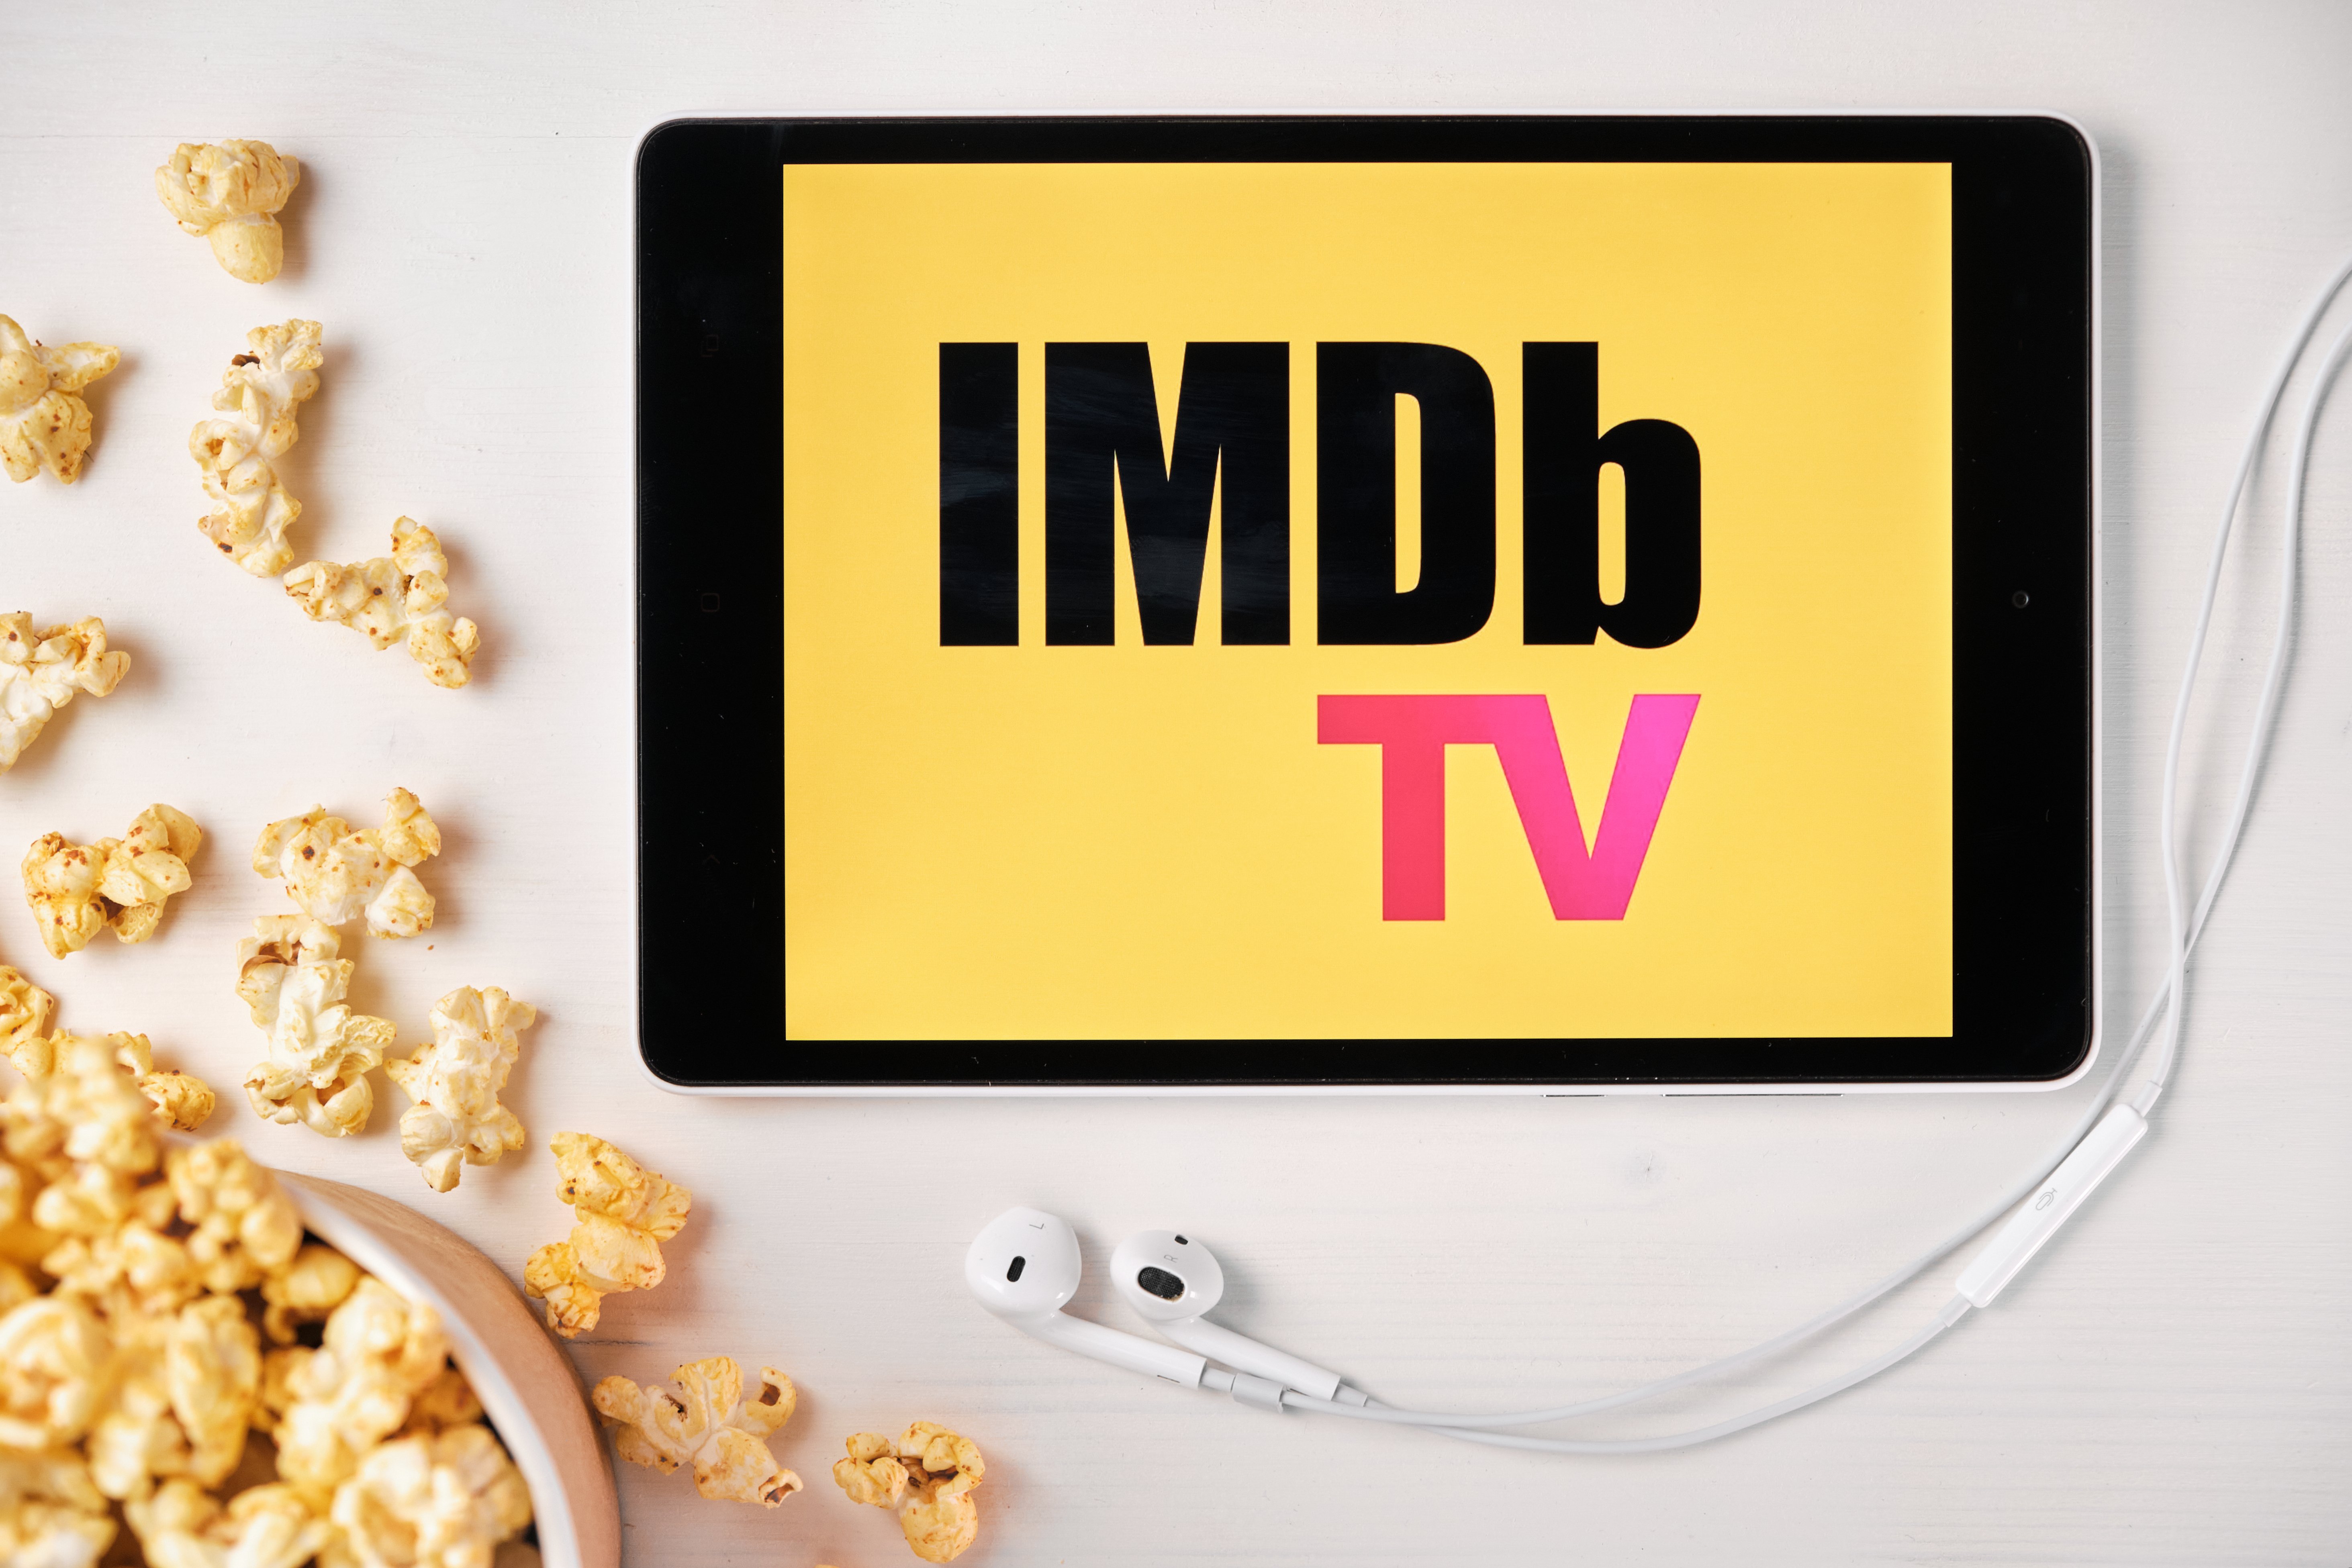 Amazon’s Free Streaming Service IMDb TV Launches in the UK